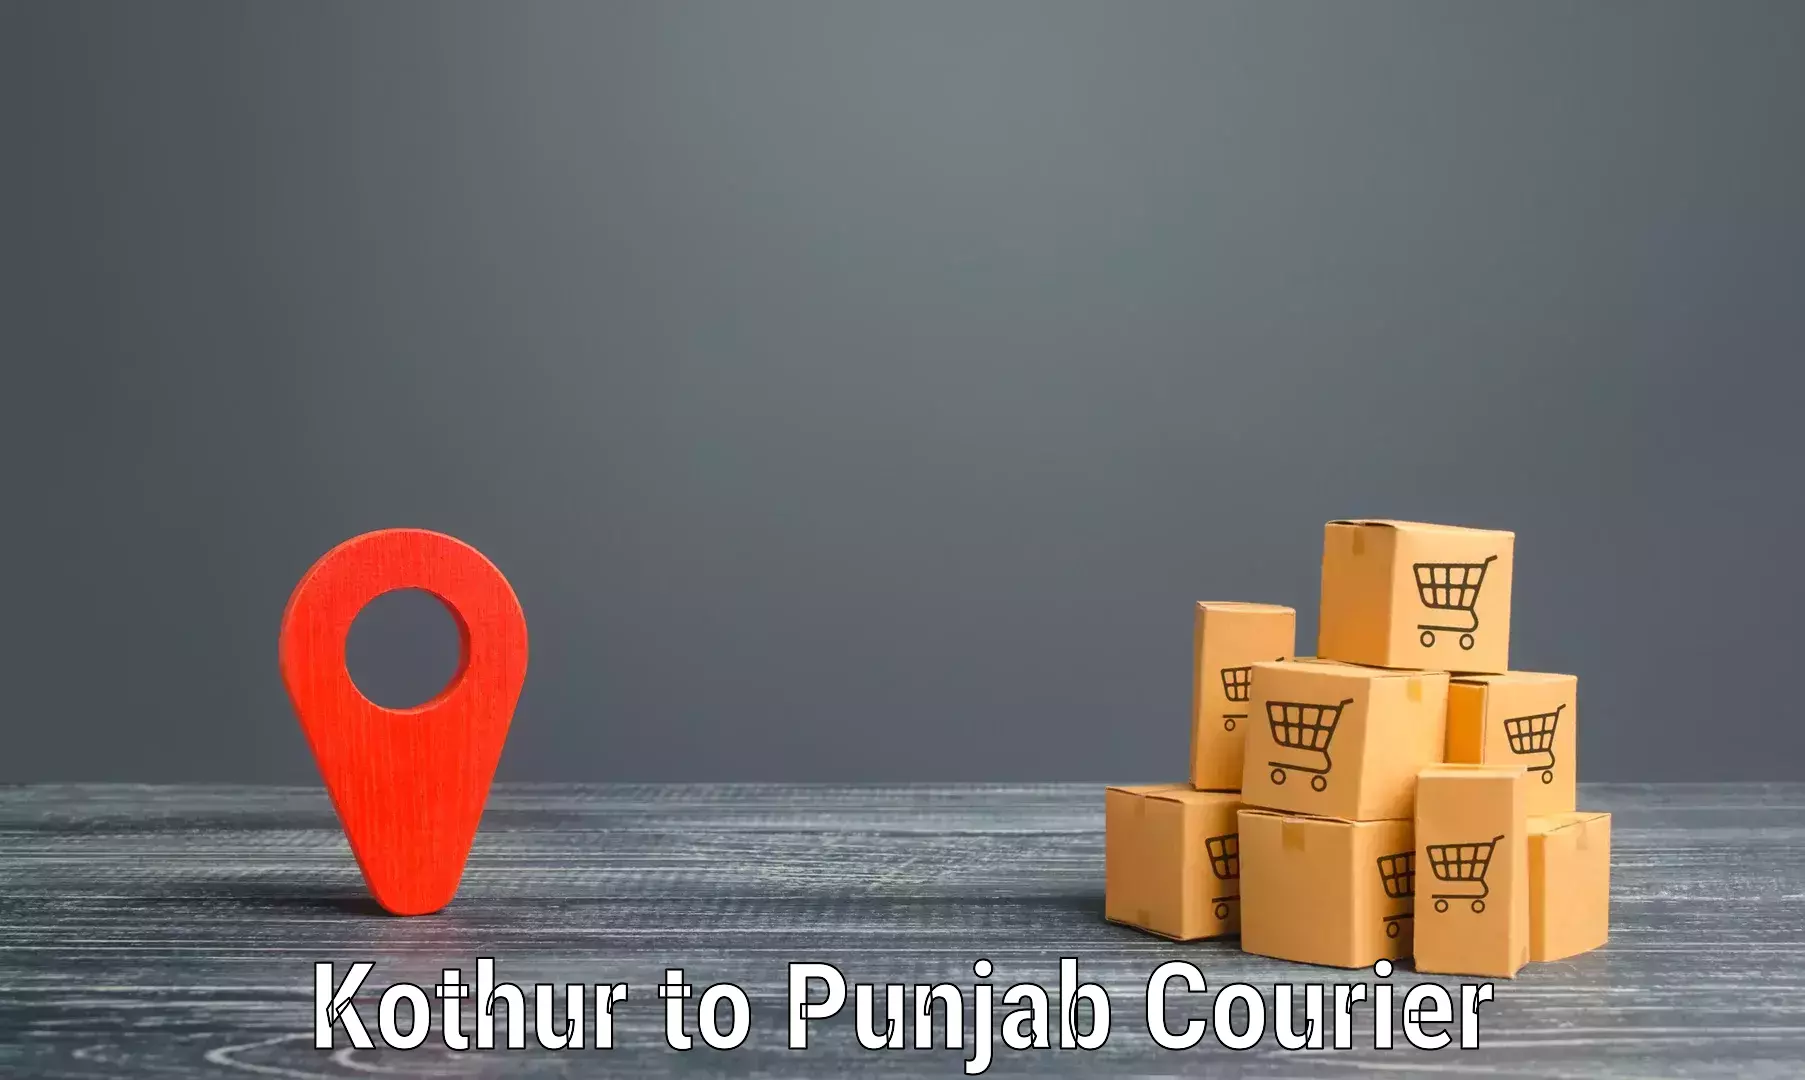 24/7 courier service Kothur to Malout